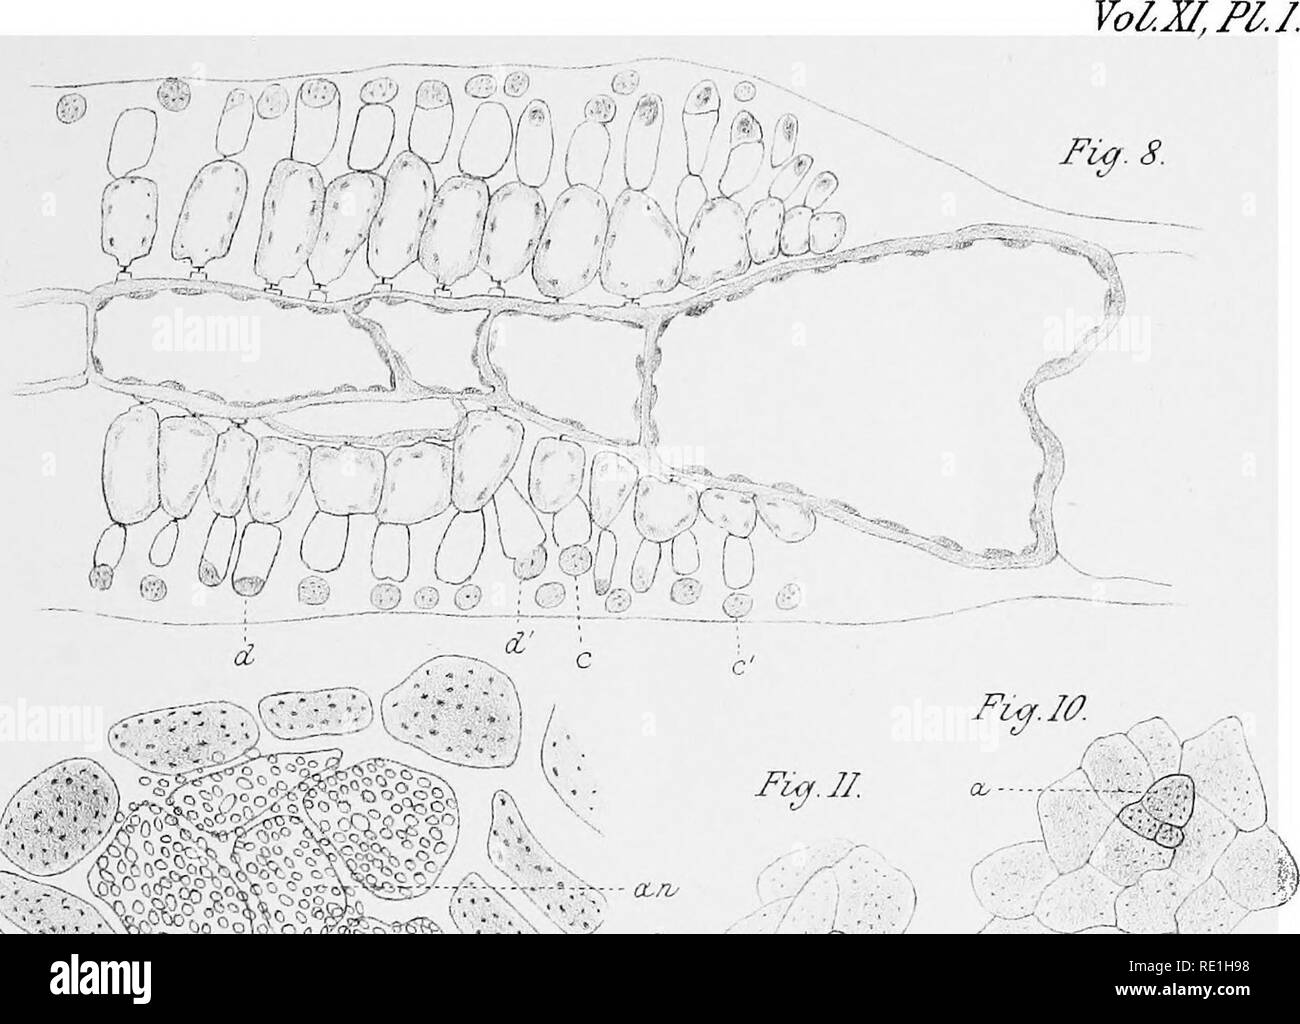 The structure and development of Grinnellia americana, Harv. Algae.  ^T^Tjt?^ ^ /s^ fK.''^M /^Q^. .&quot;^Ta^oi '^^ ^^^.^. u. • y'. Please note  that these images are extracted from scanned page images